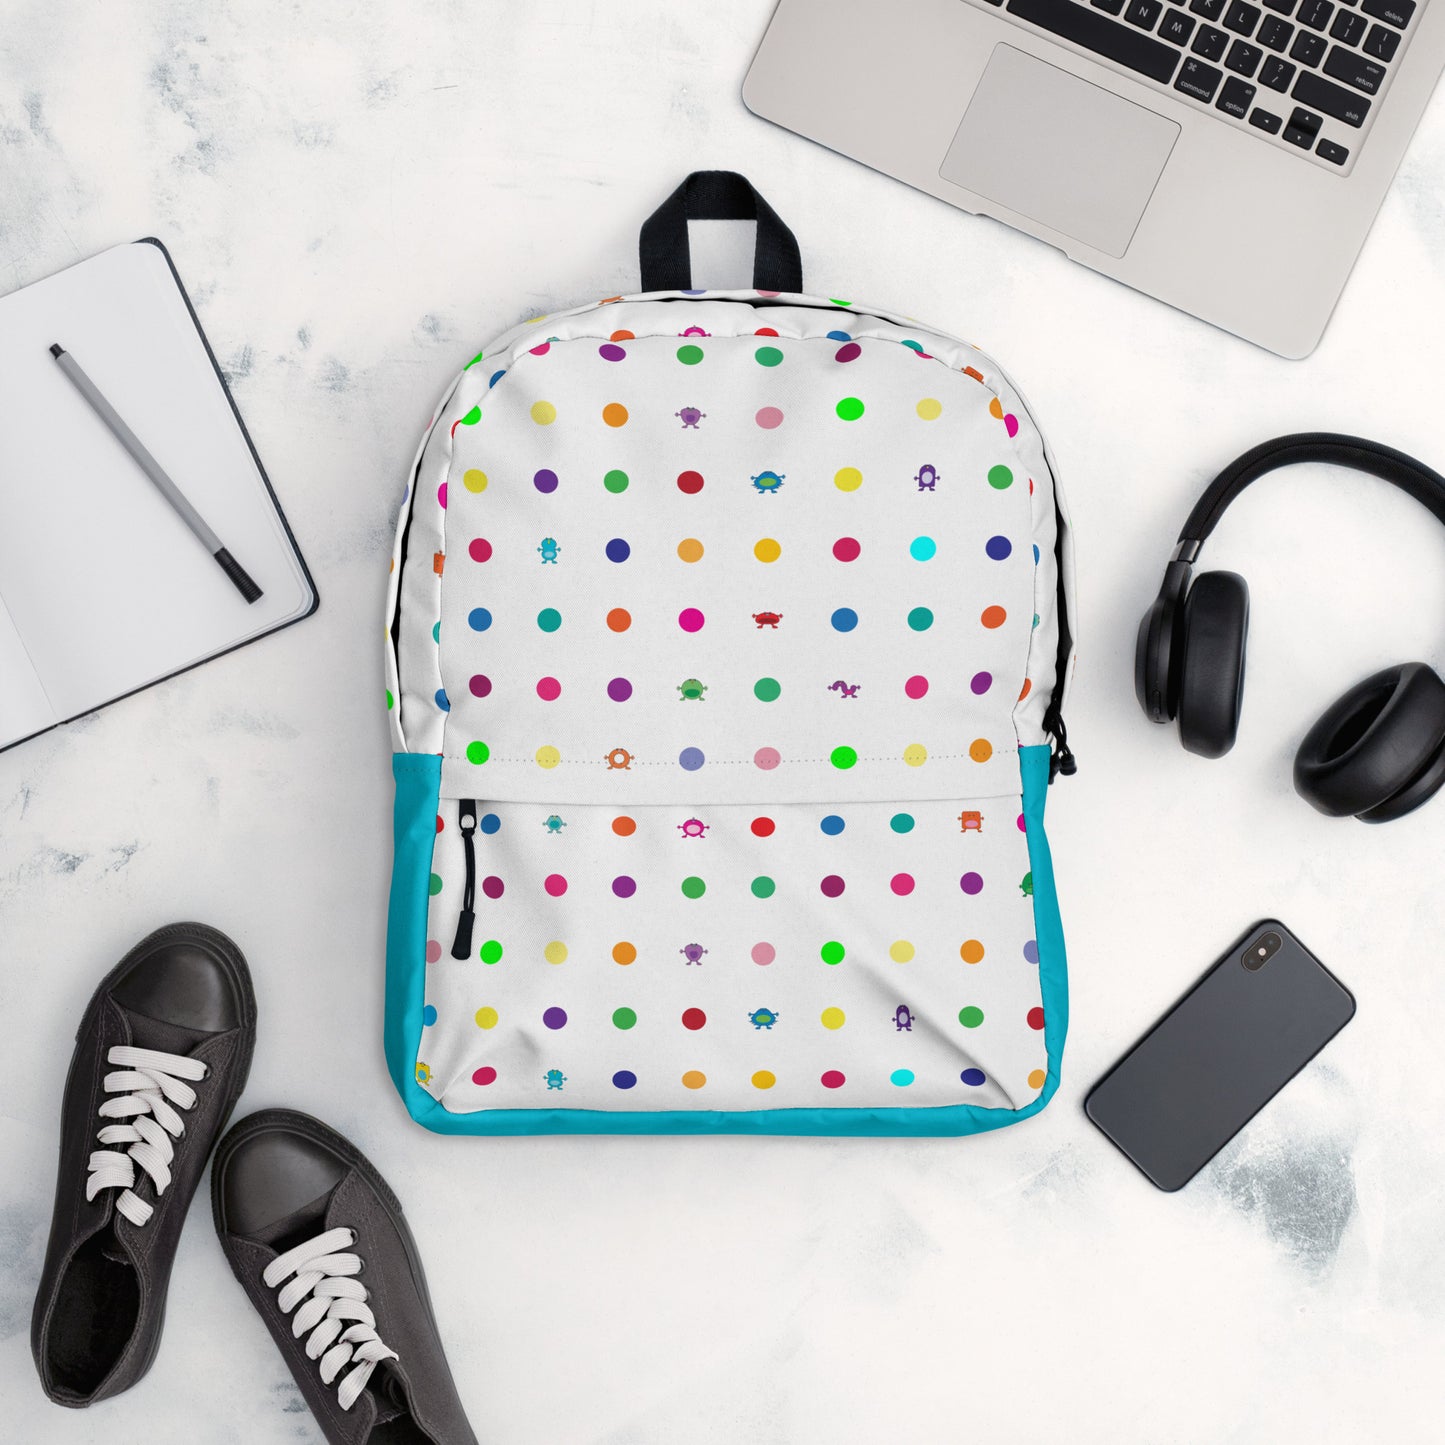 White Turquoise Small Dot Monster Backpack with zip pocket apple laptop iPhone